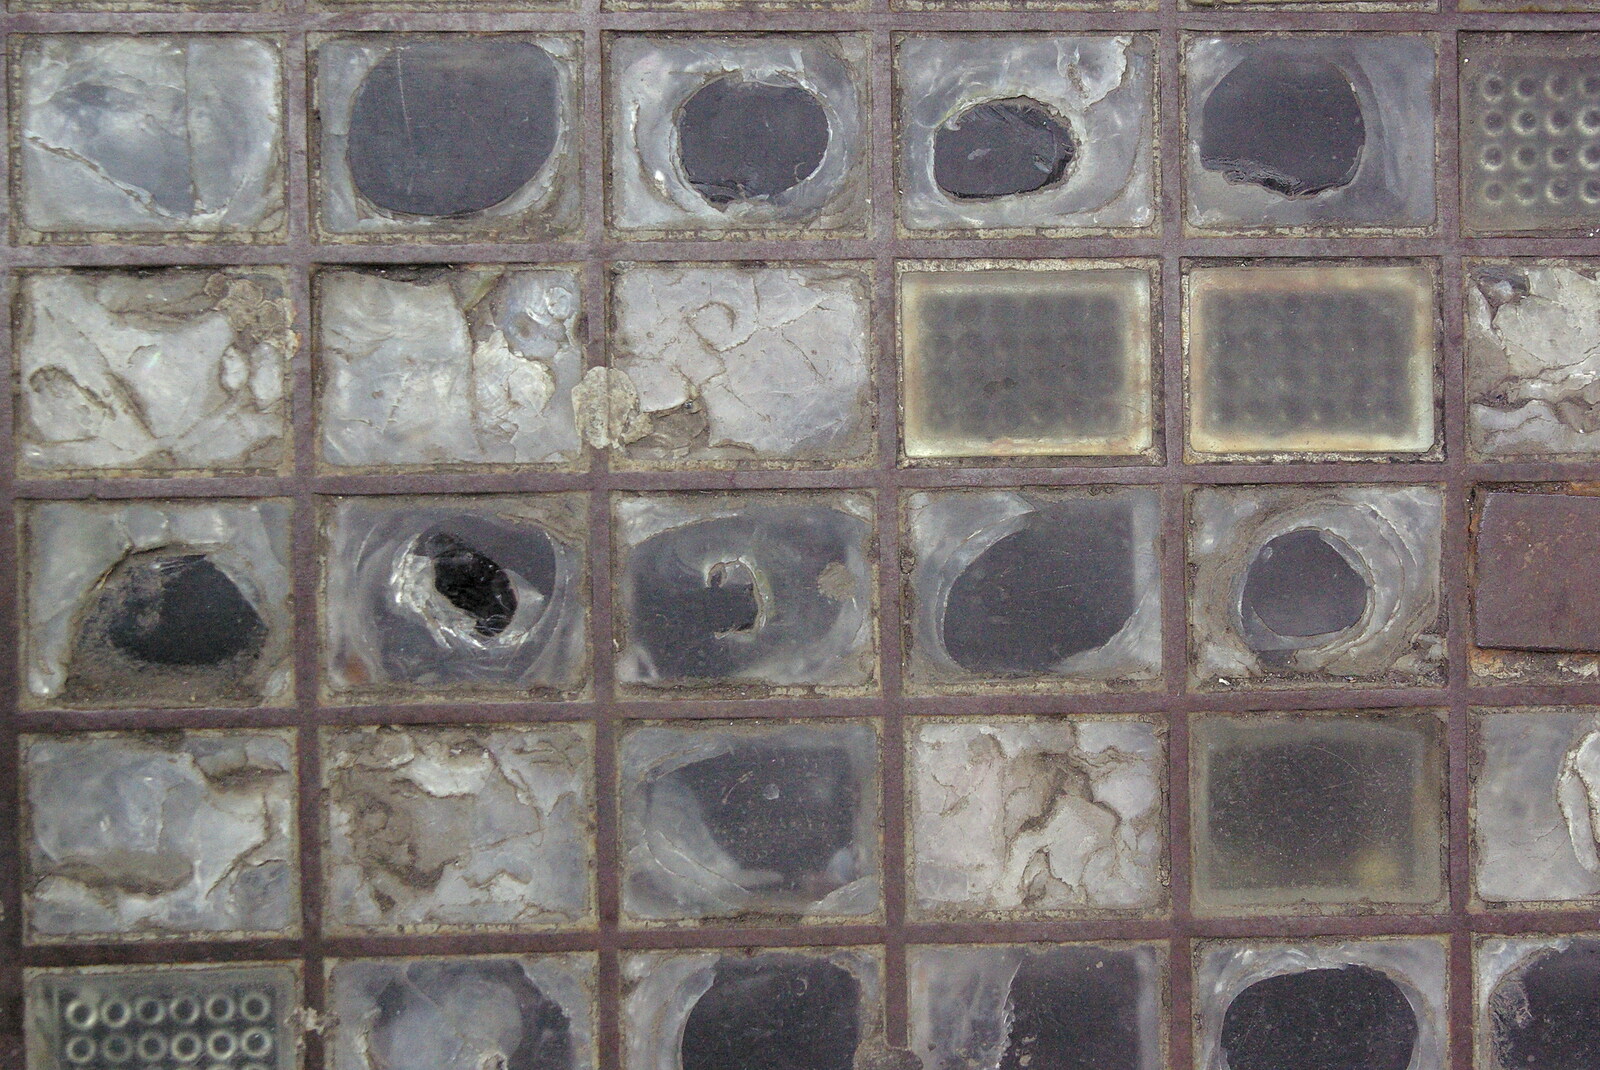 Easter in Dublin, Ireland - 21st March 2008: A glass grating on Grafton Street